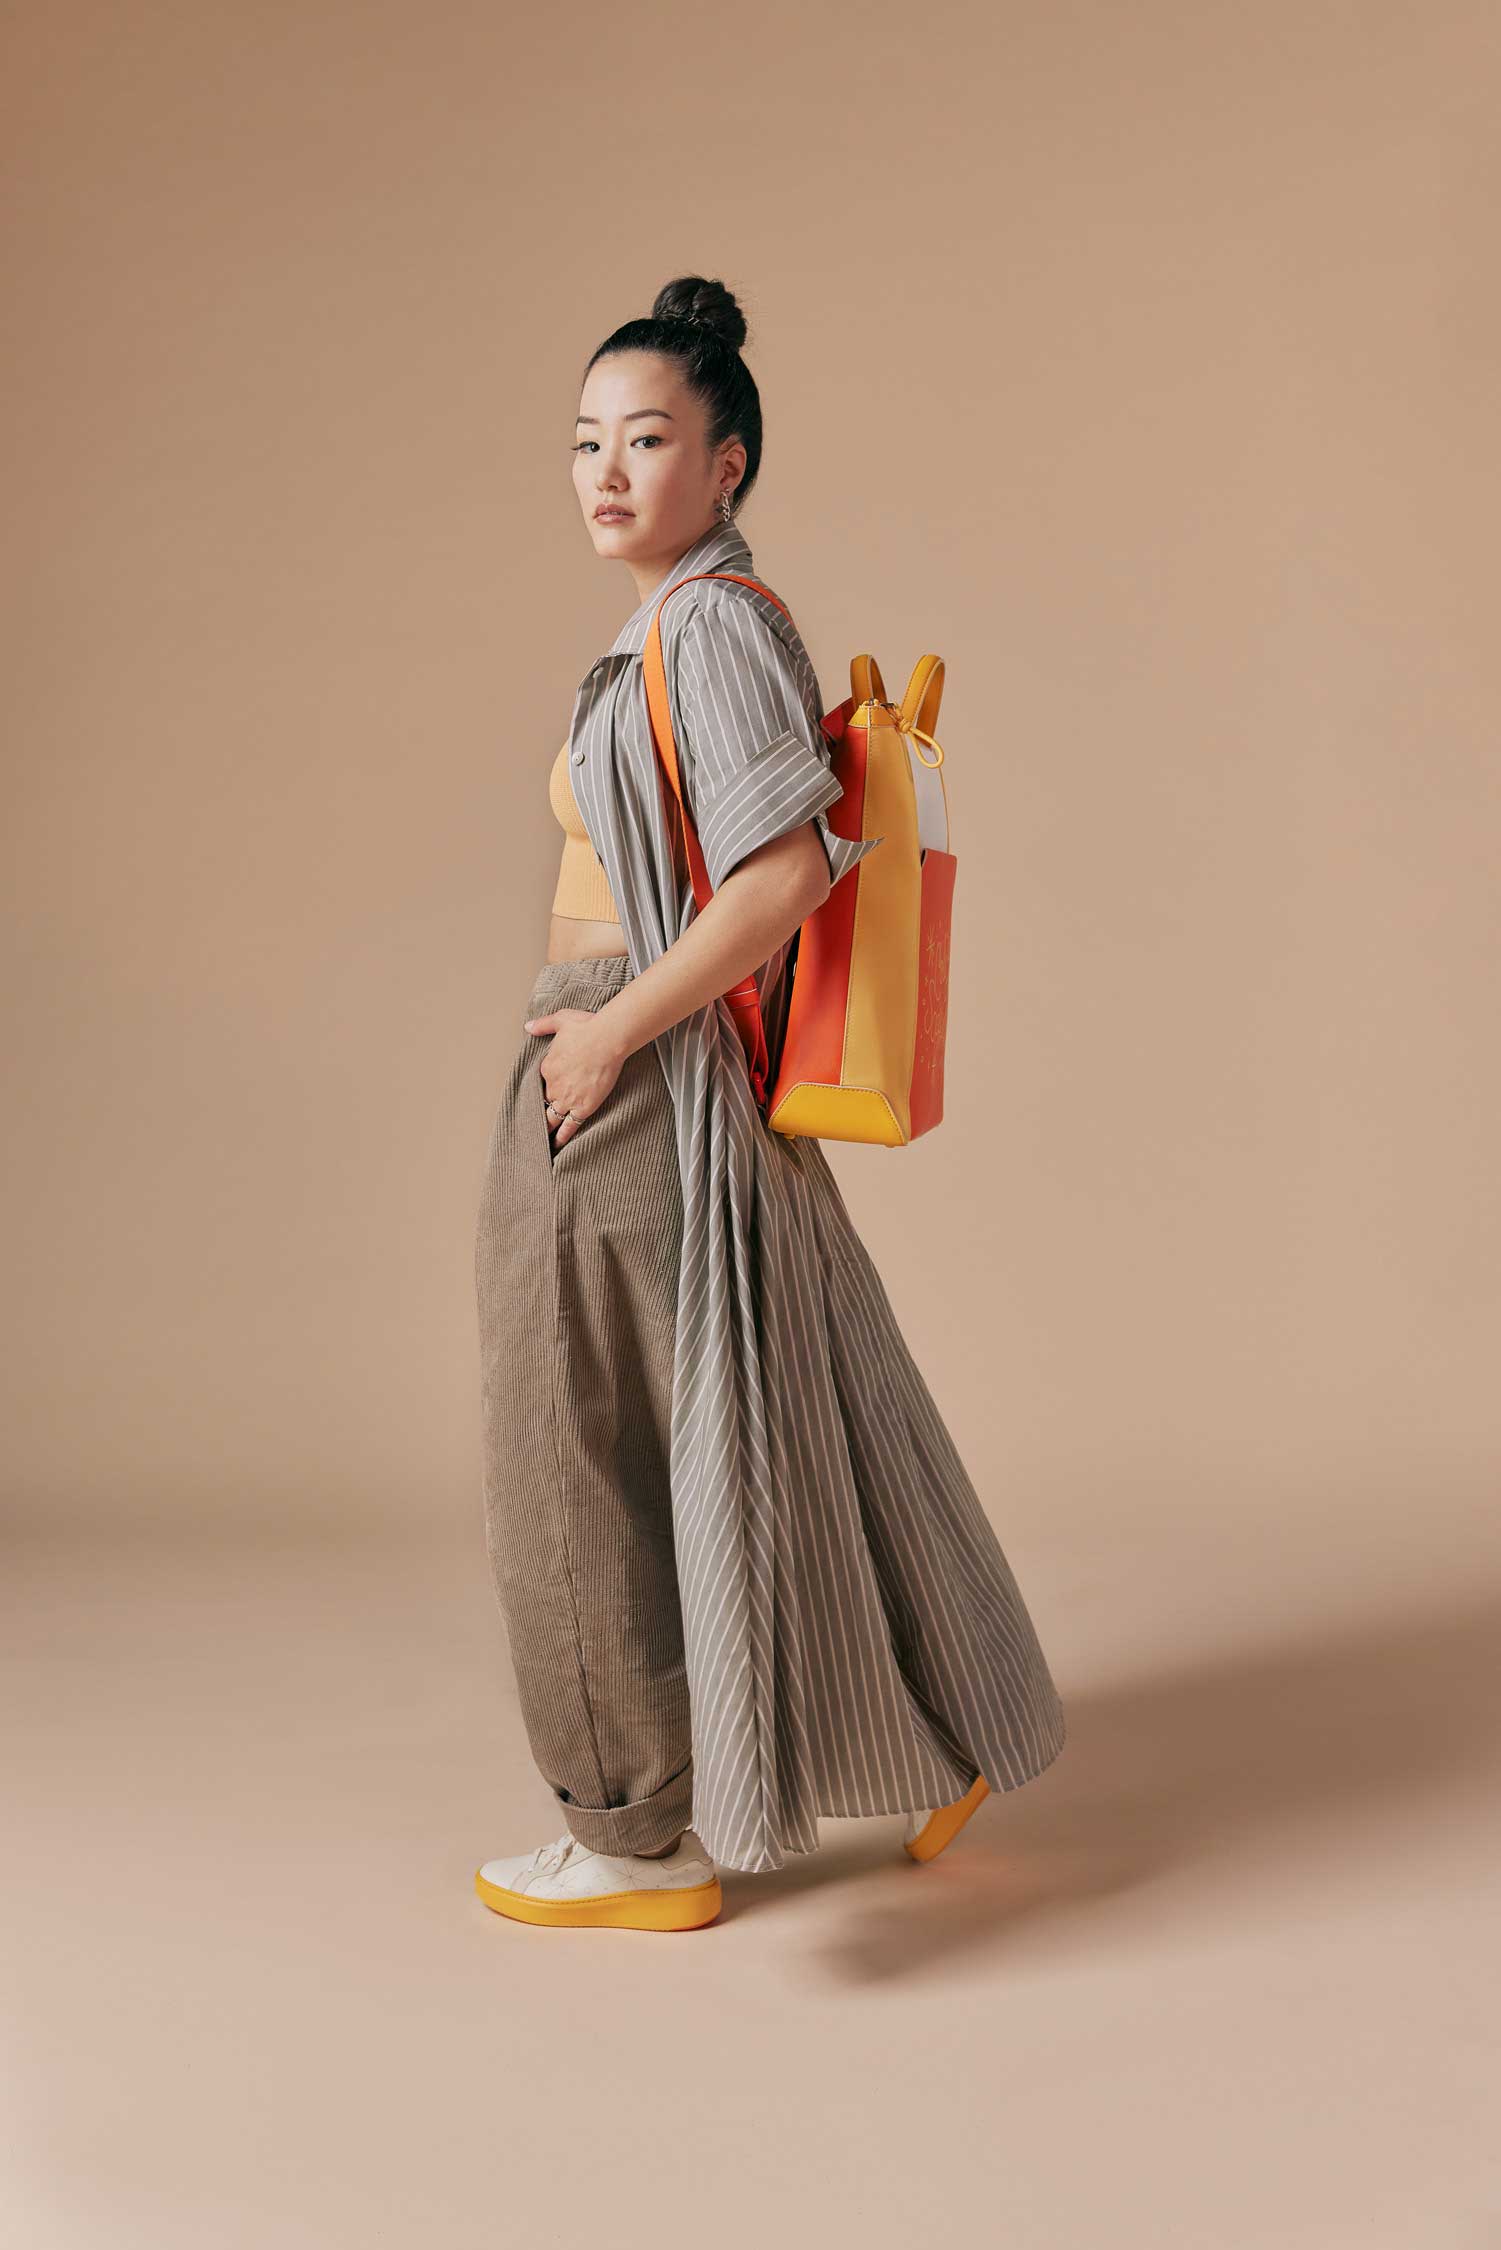 Cole Haan Collaborates with Illustrator and Designer Sophia Chang On Its Latest Capsule Collection For Women